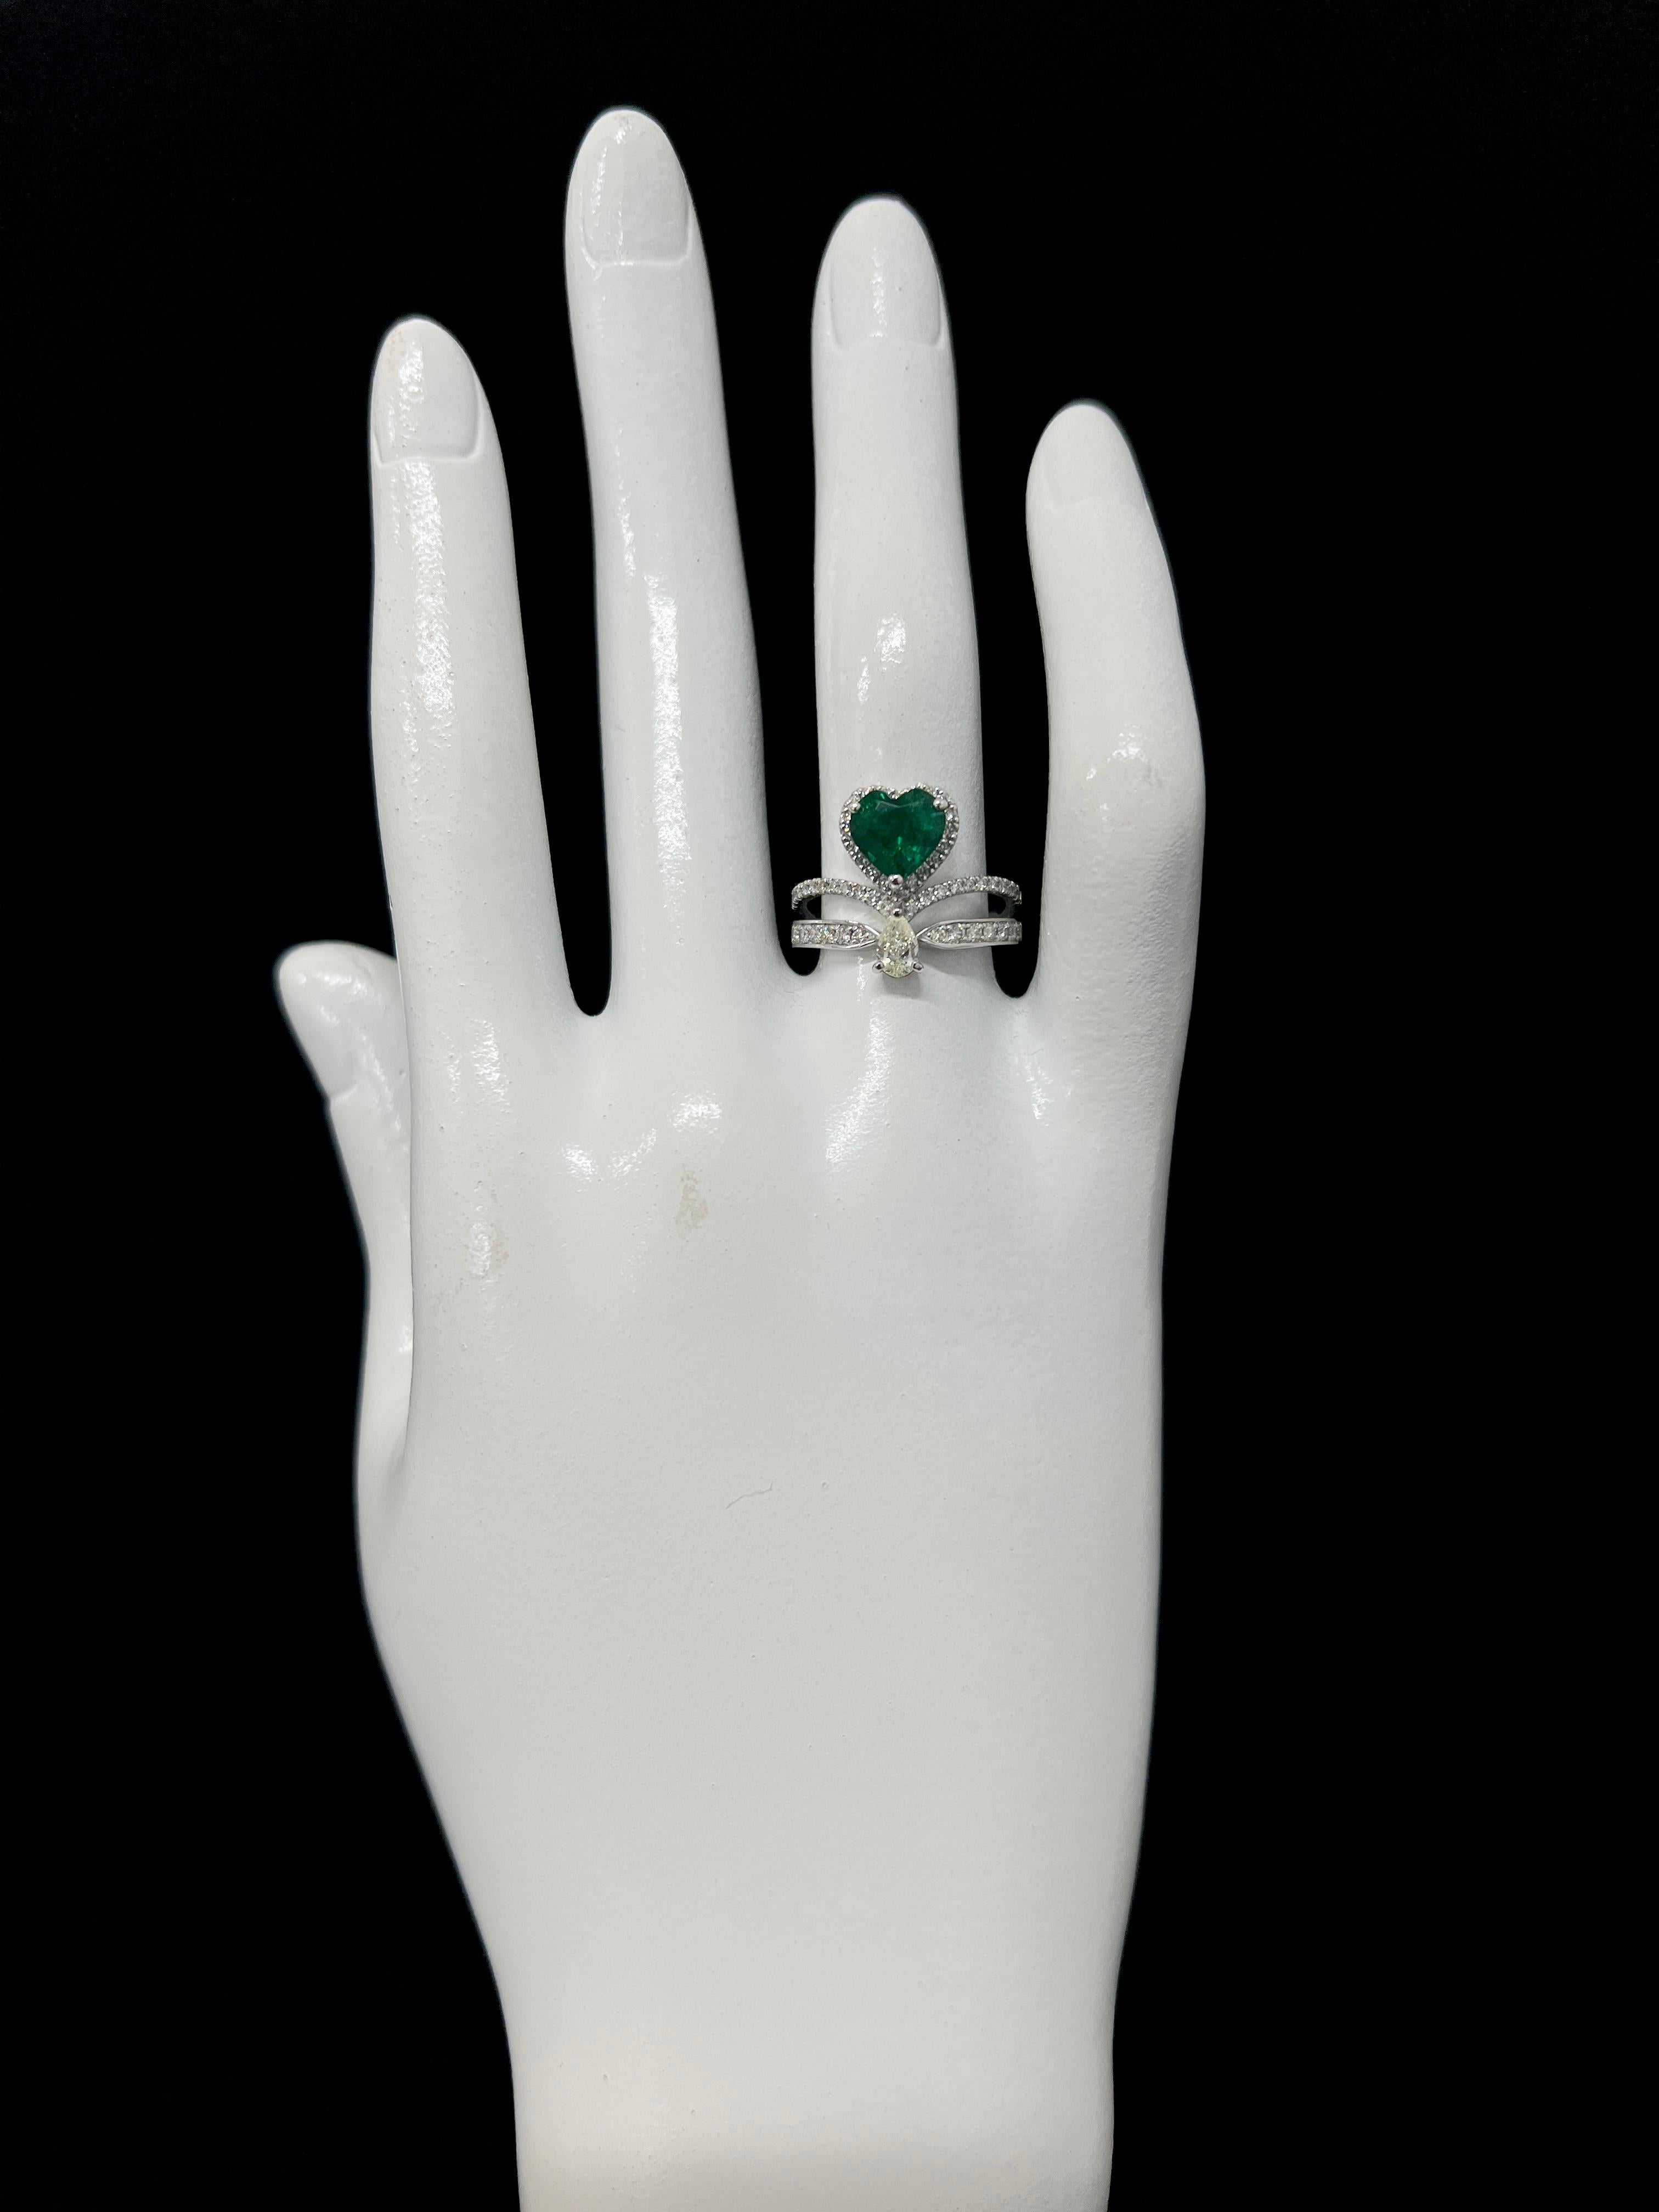 1.20 Carat Heart-Cut, Zambian Emerald and Diamond Crown Ring Set in Platinum For Sale 1